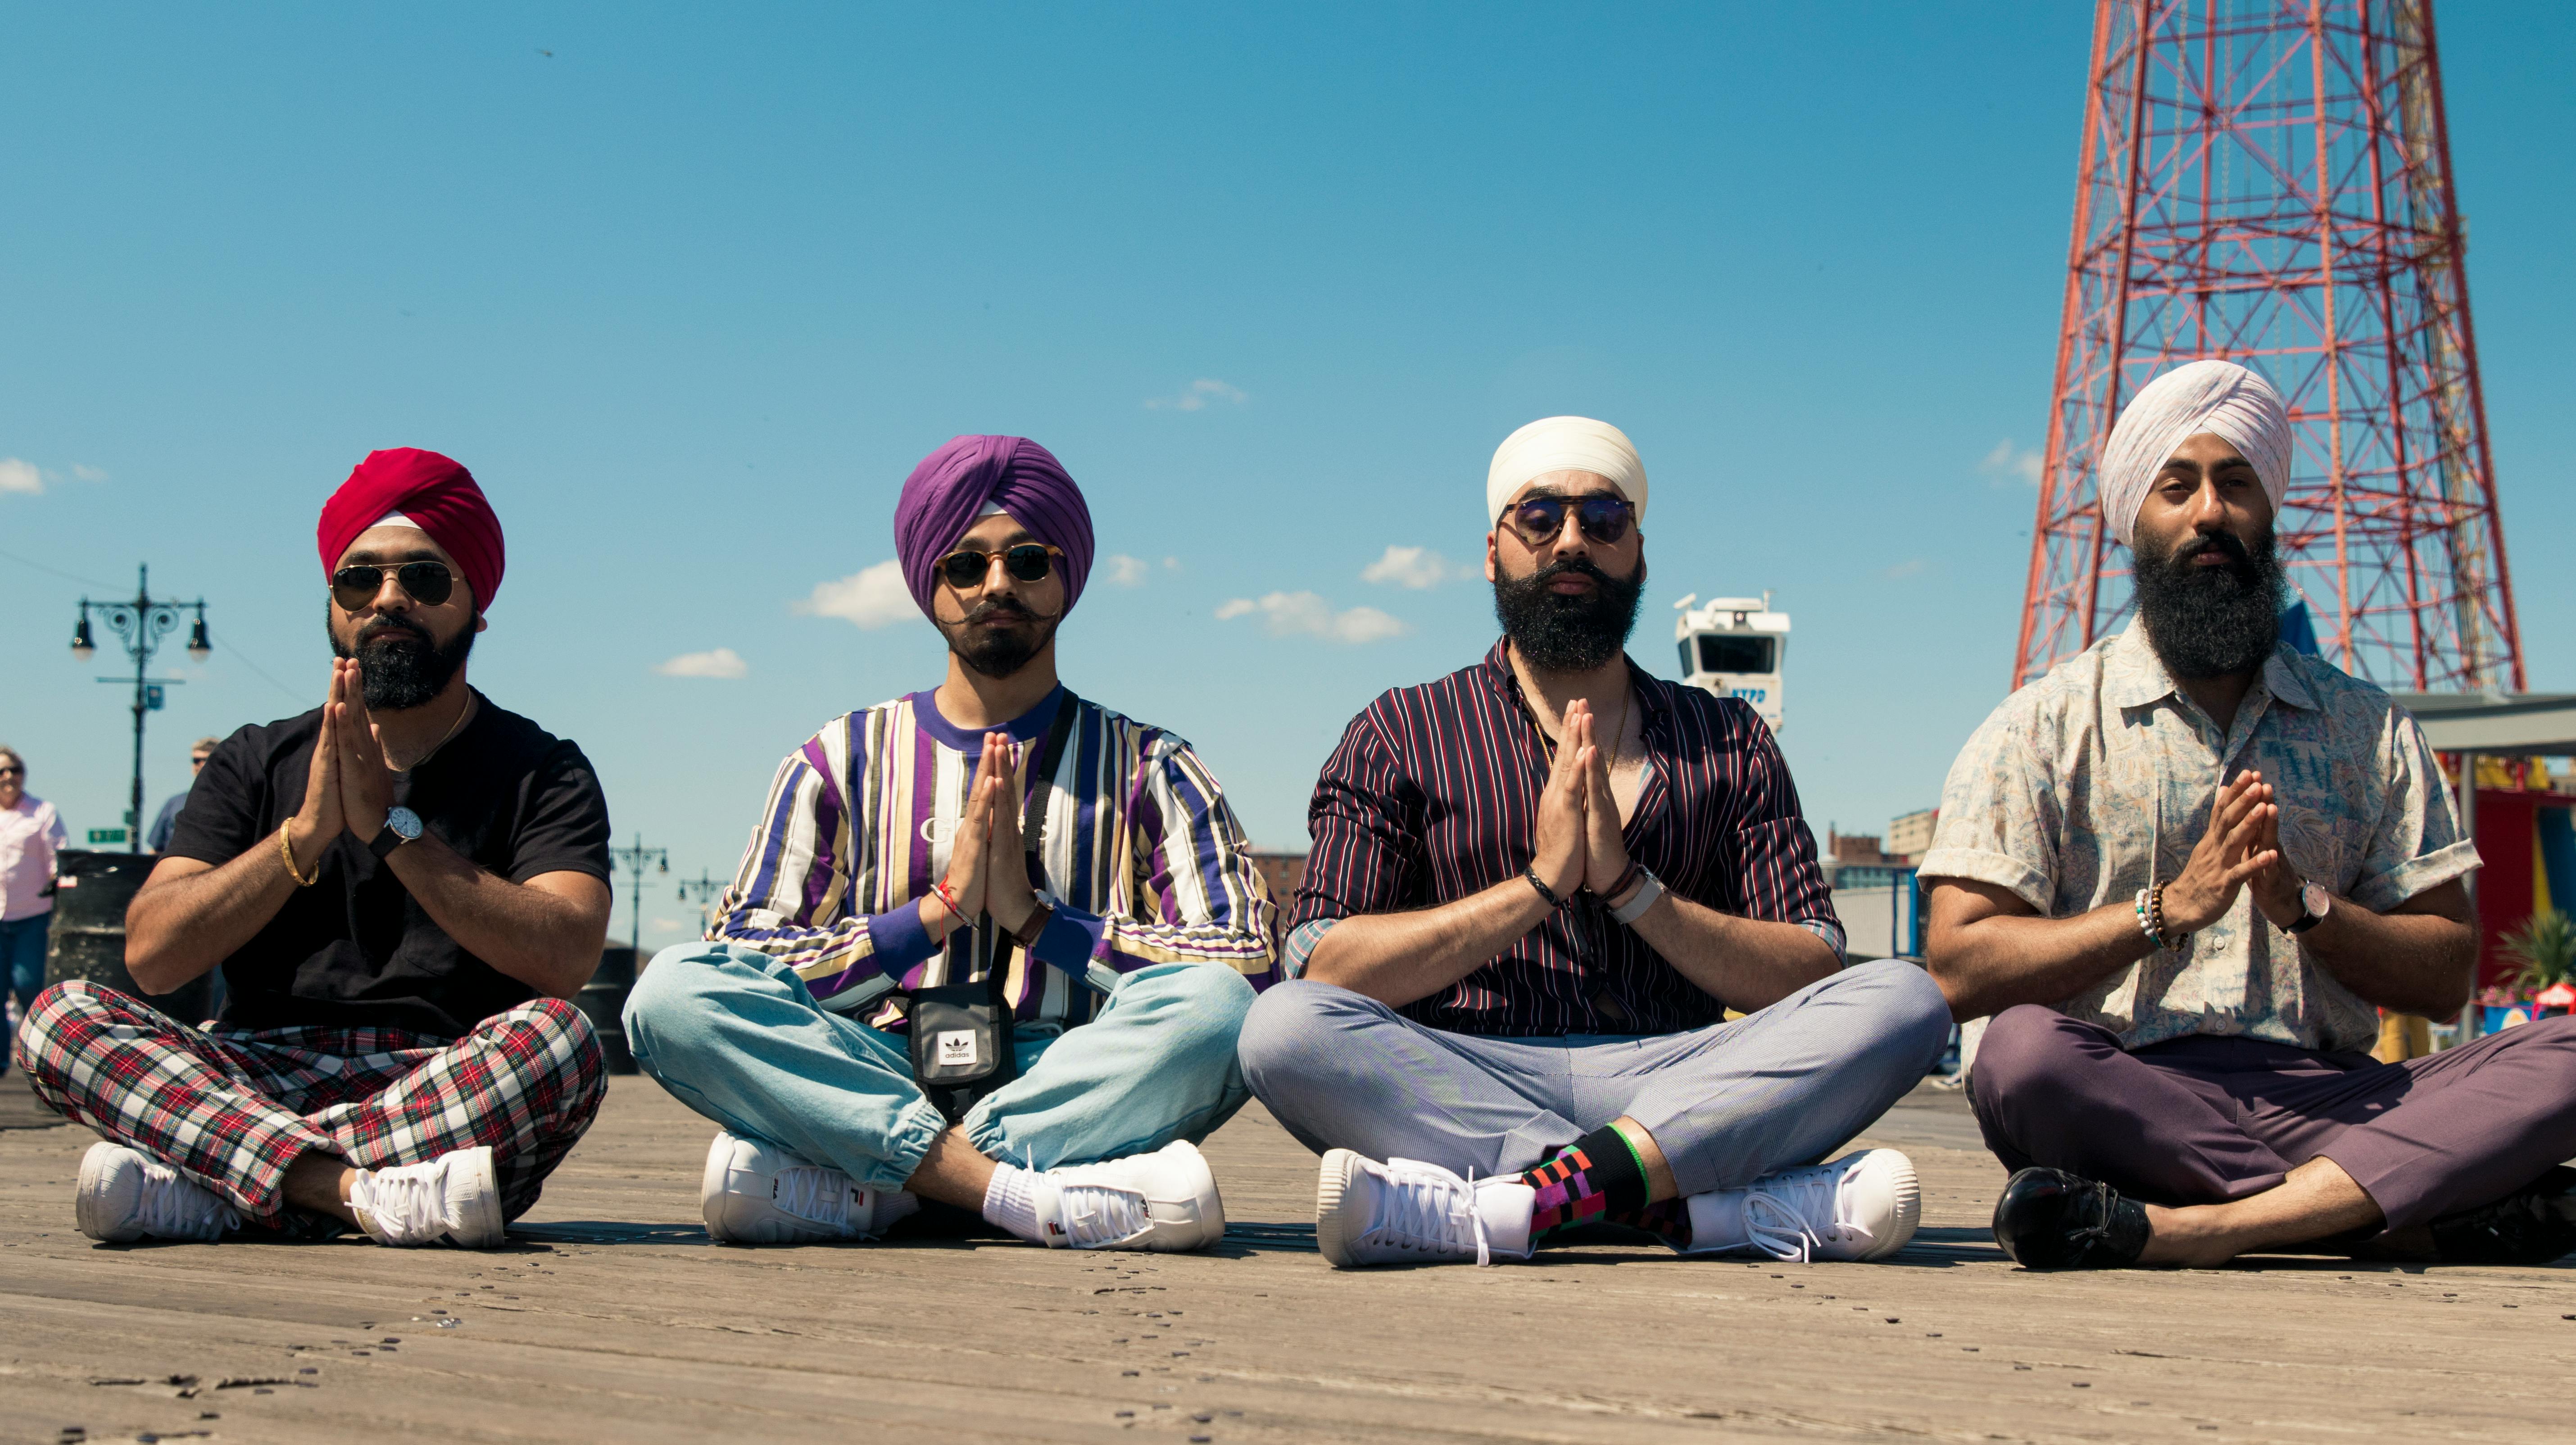 Four men sitting cross-legged with hands in prayer | Source: Pexels